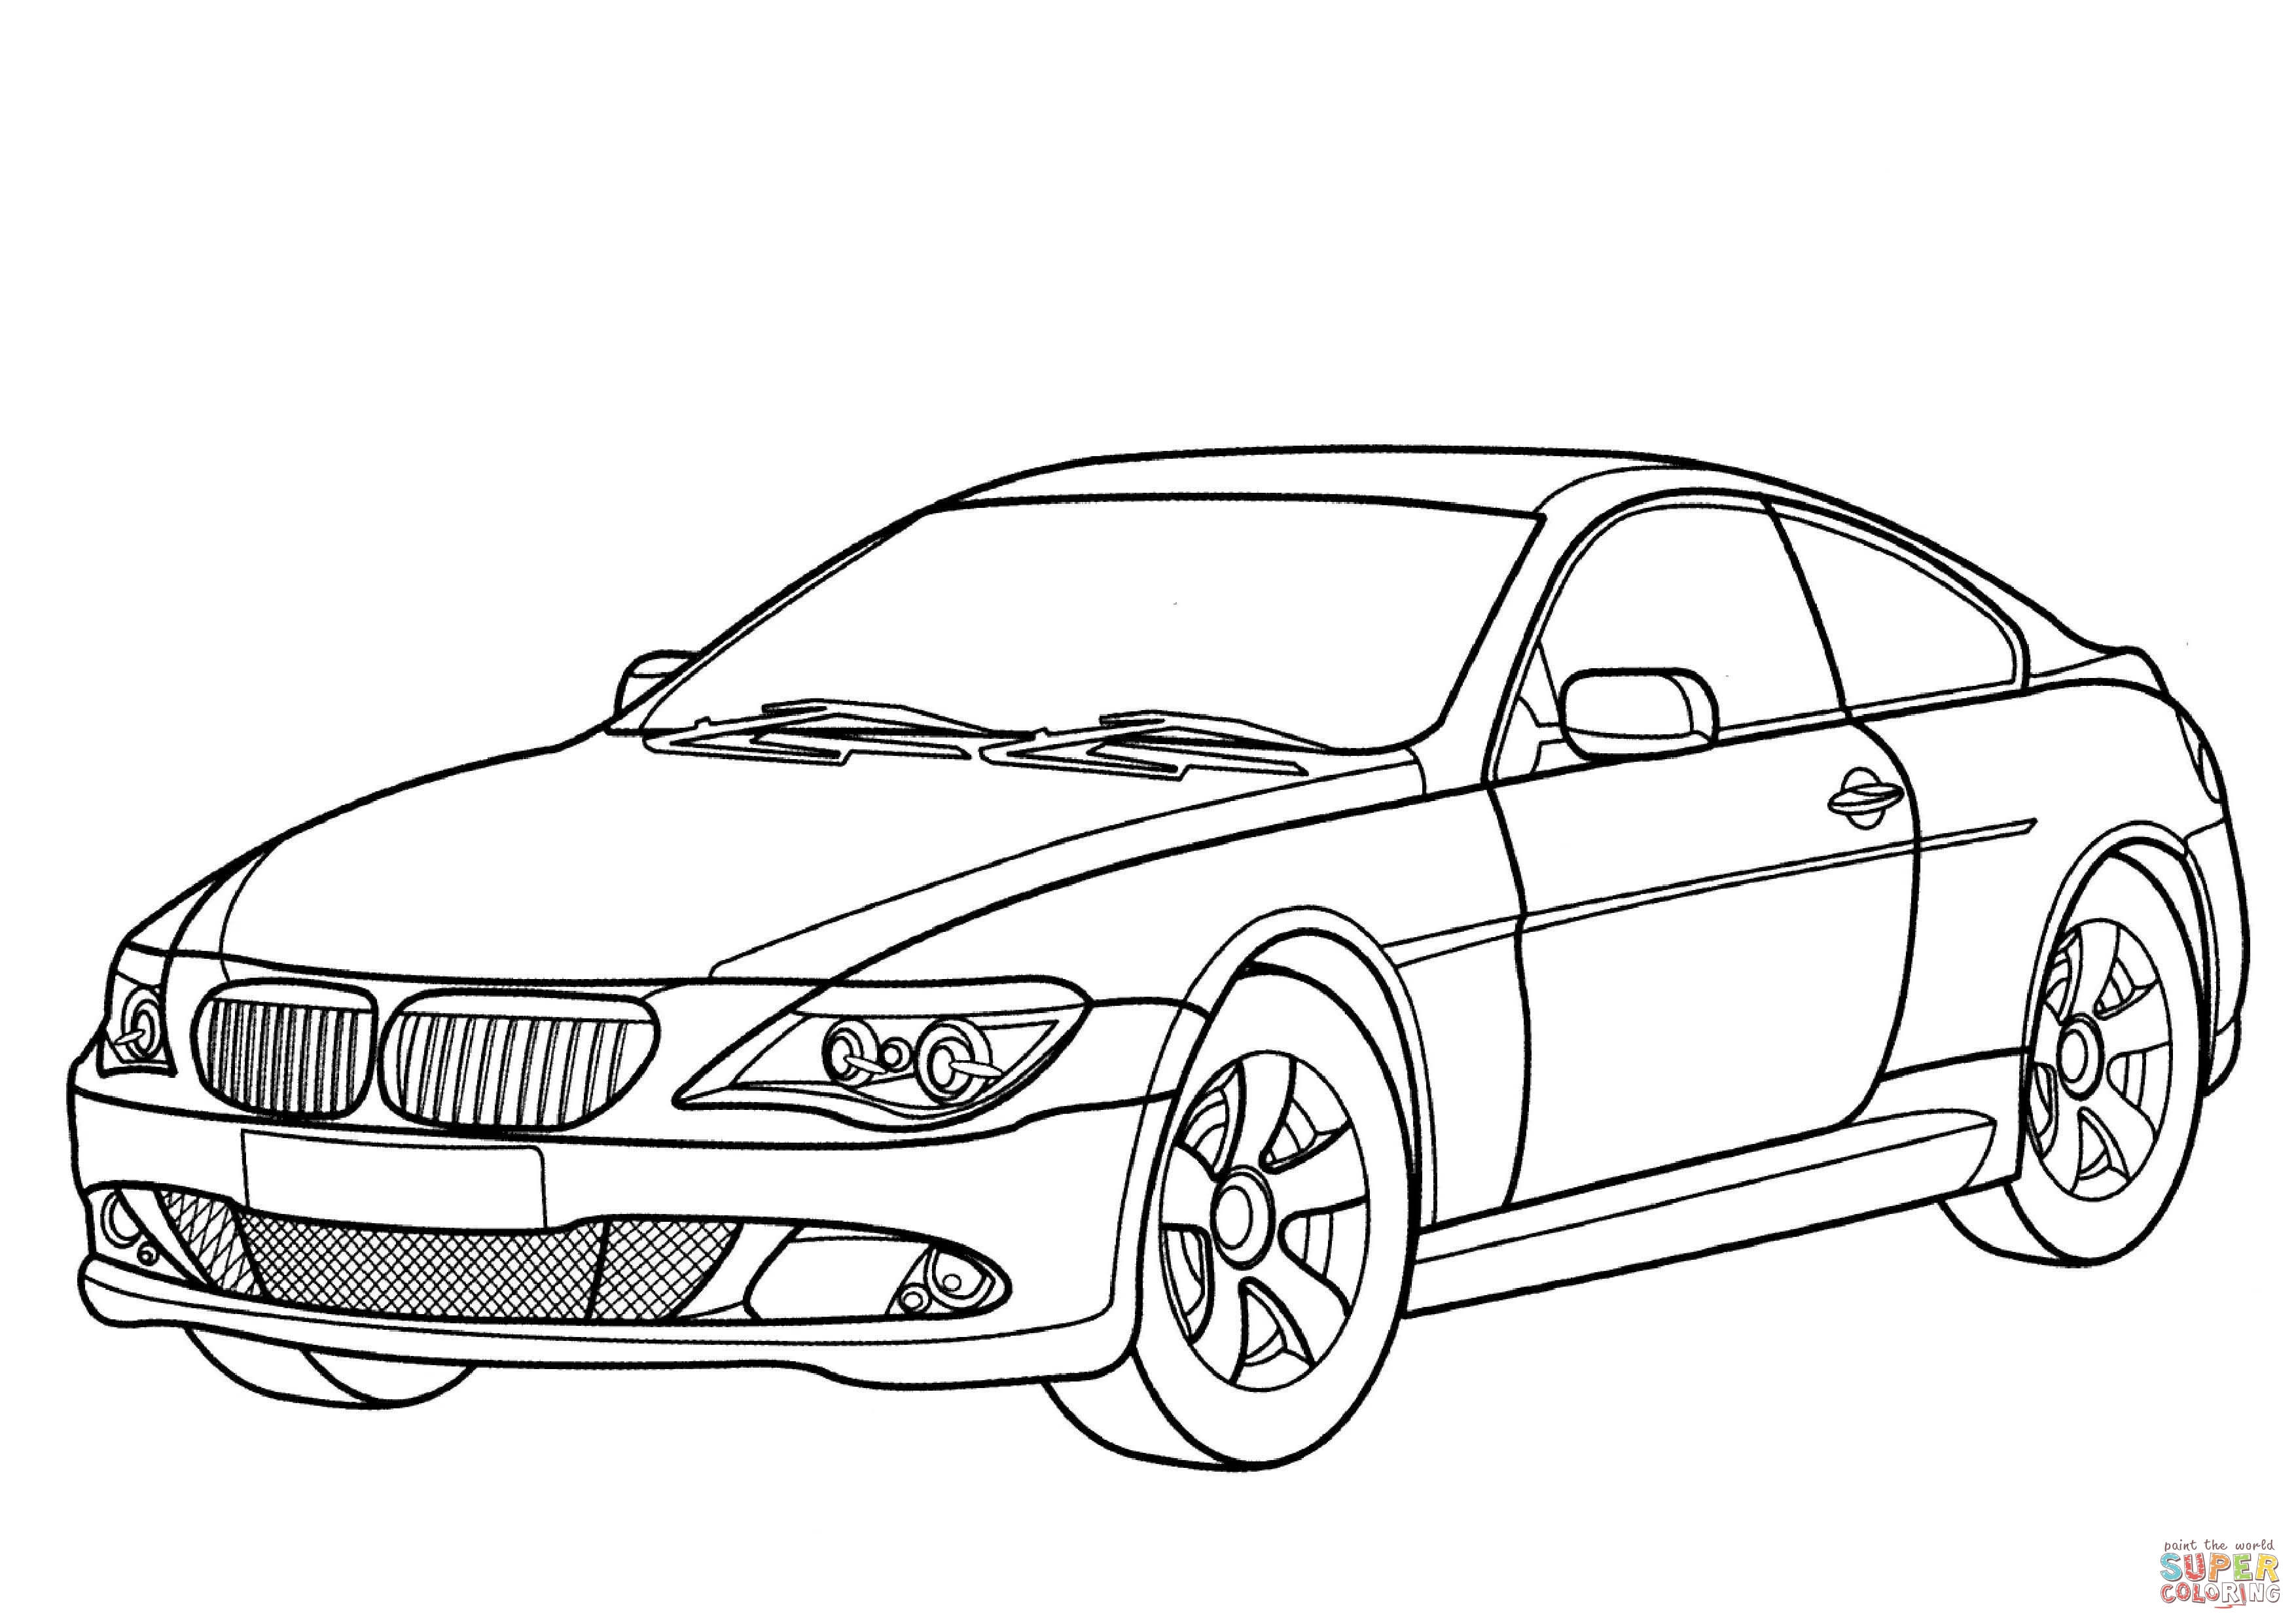 Bmw coloring pages to download and print for free